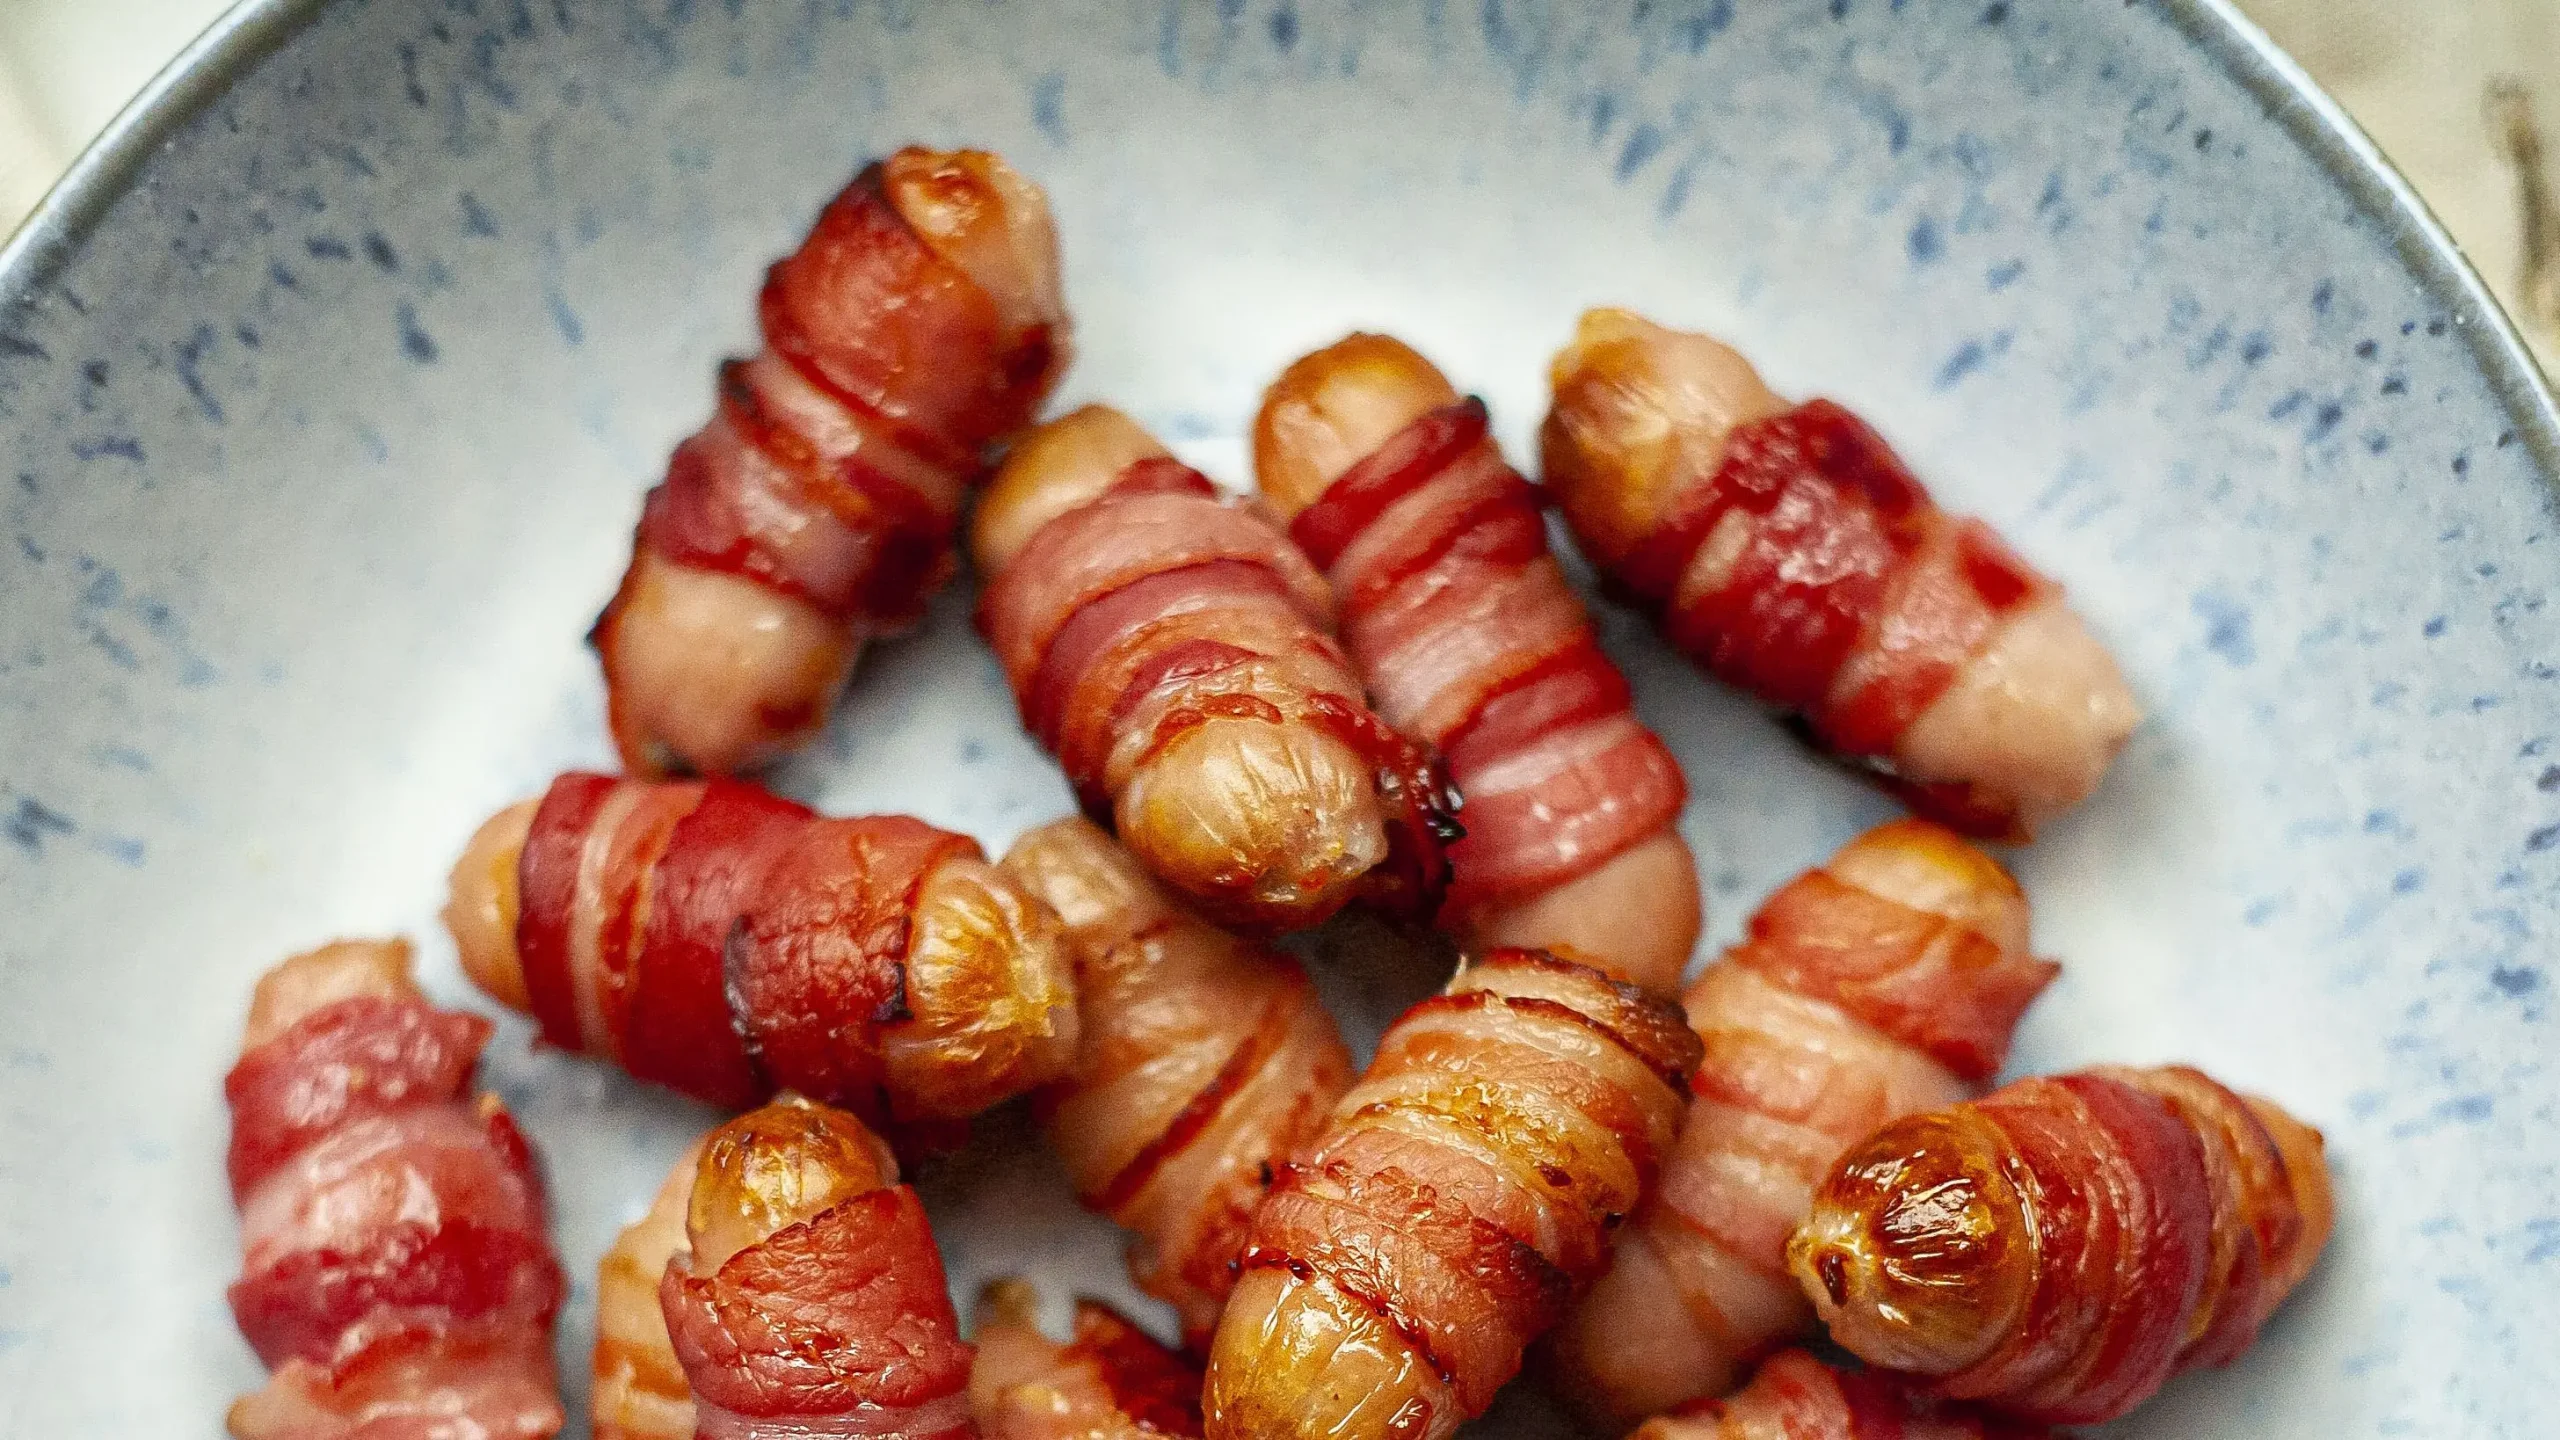 pigs in blankets smoked or unsmoked bacon - What is the original pigs in a blanket